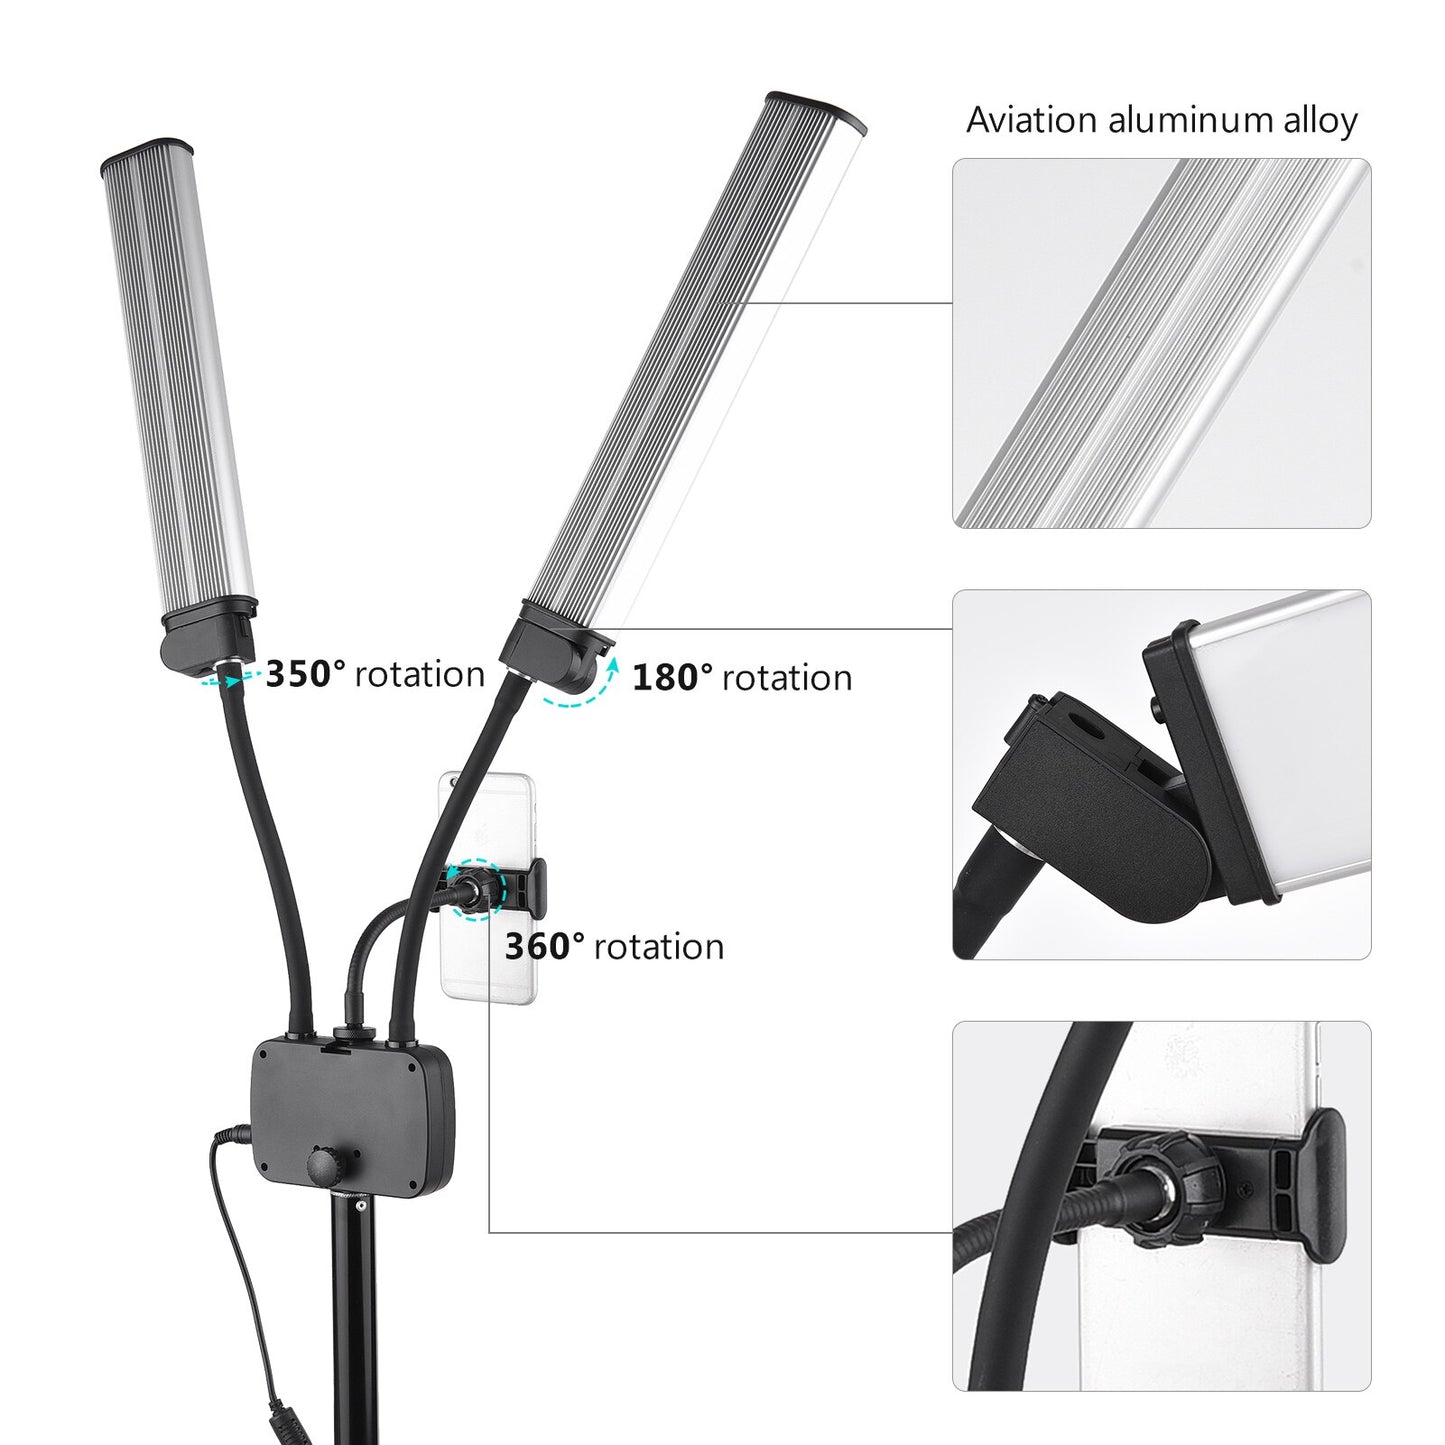 Flexible LED Fill Light - Dimmable Video Light for Makeup and Live Stream